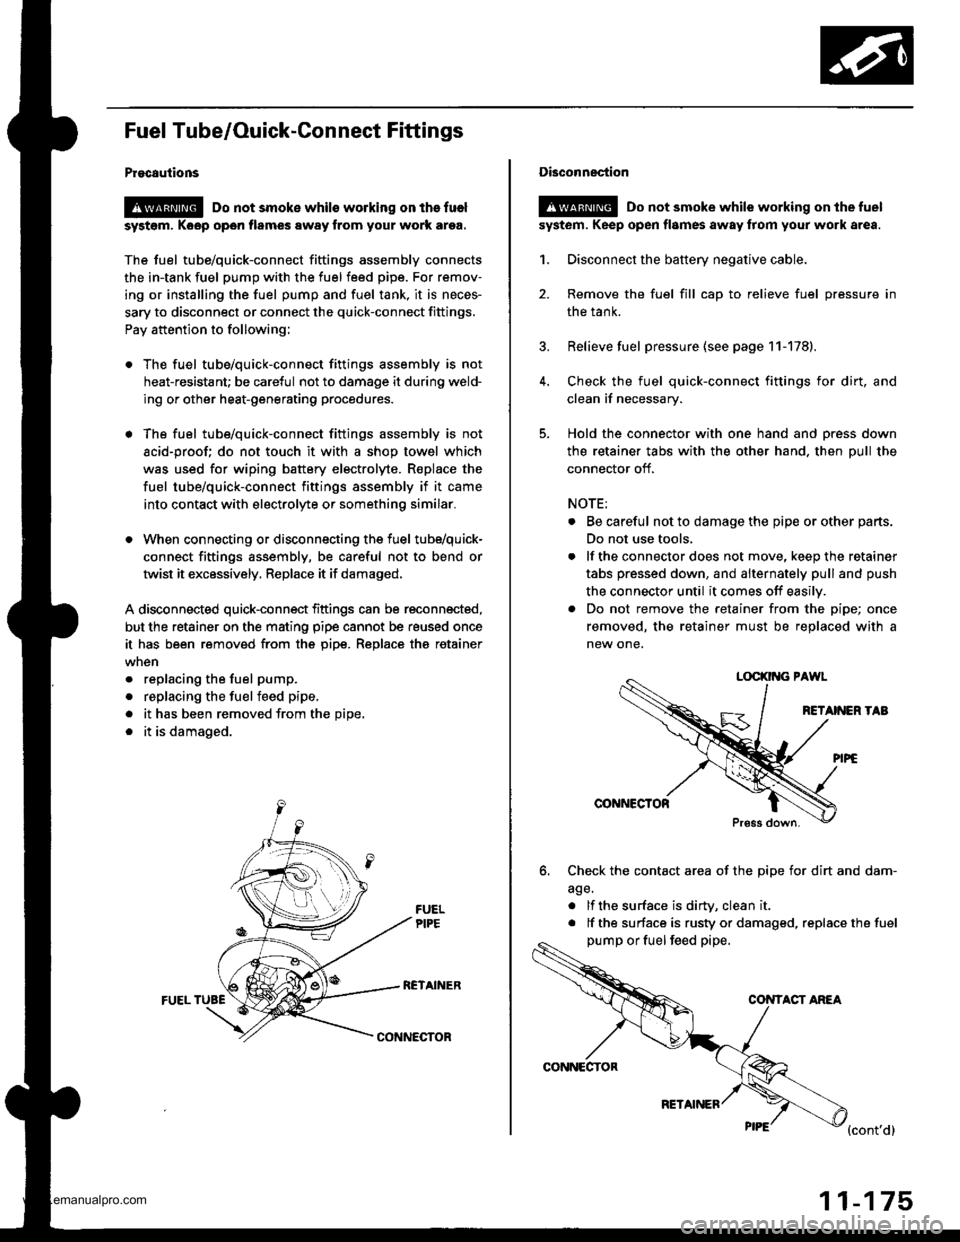 HONDA CR-V 1998 RD1-RD3 / 1.G User Guide 
Fuel Tube/Ouick-Gonnect Fittings
Procautions
@ Do not smoke whils working on the fuel
syst6m, Koop open flames away from your work ar9a.
The fuel tube/quick-connect fittings assembly connects
the in-